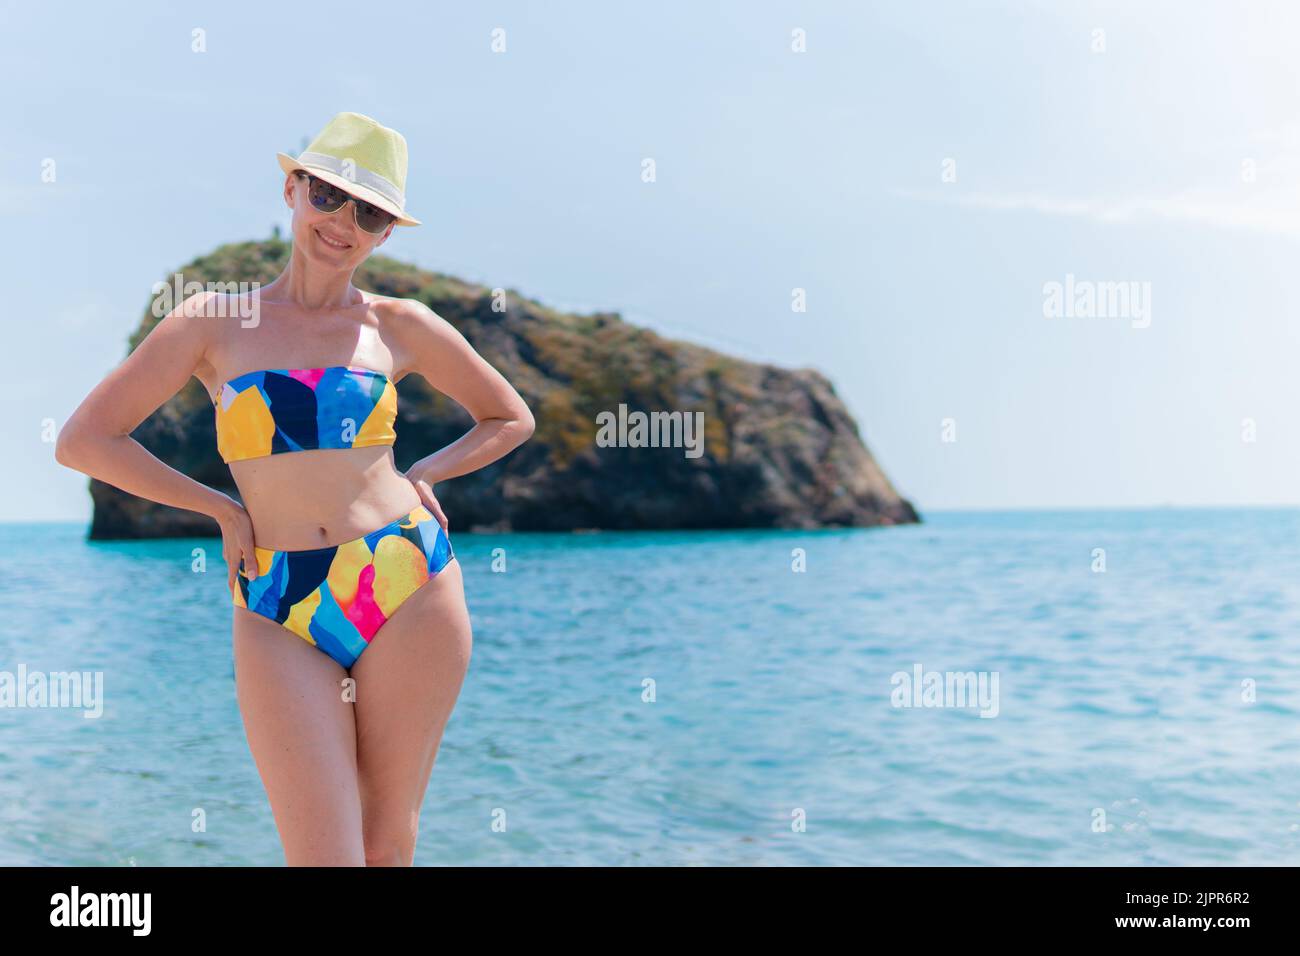 Smiling bathe fiolent people hat girl cape crimea summer rock, for sevastopol near for george from bay vacation, travel stone. Sun panoramic outdoor Stock Photo